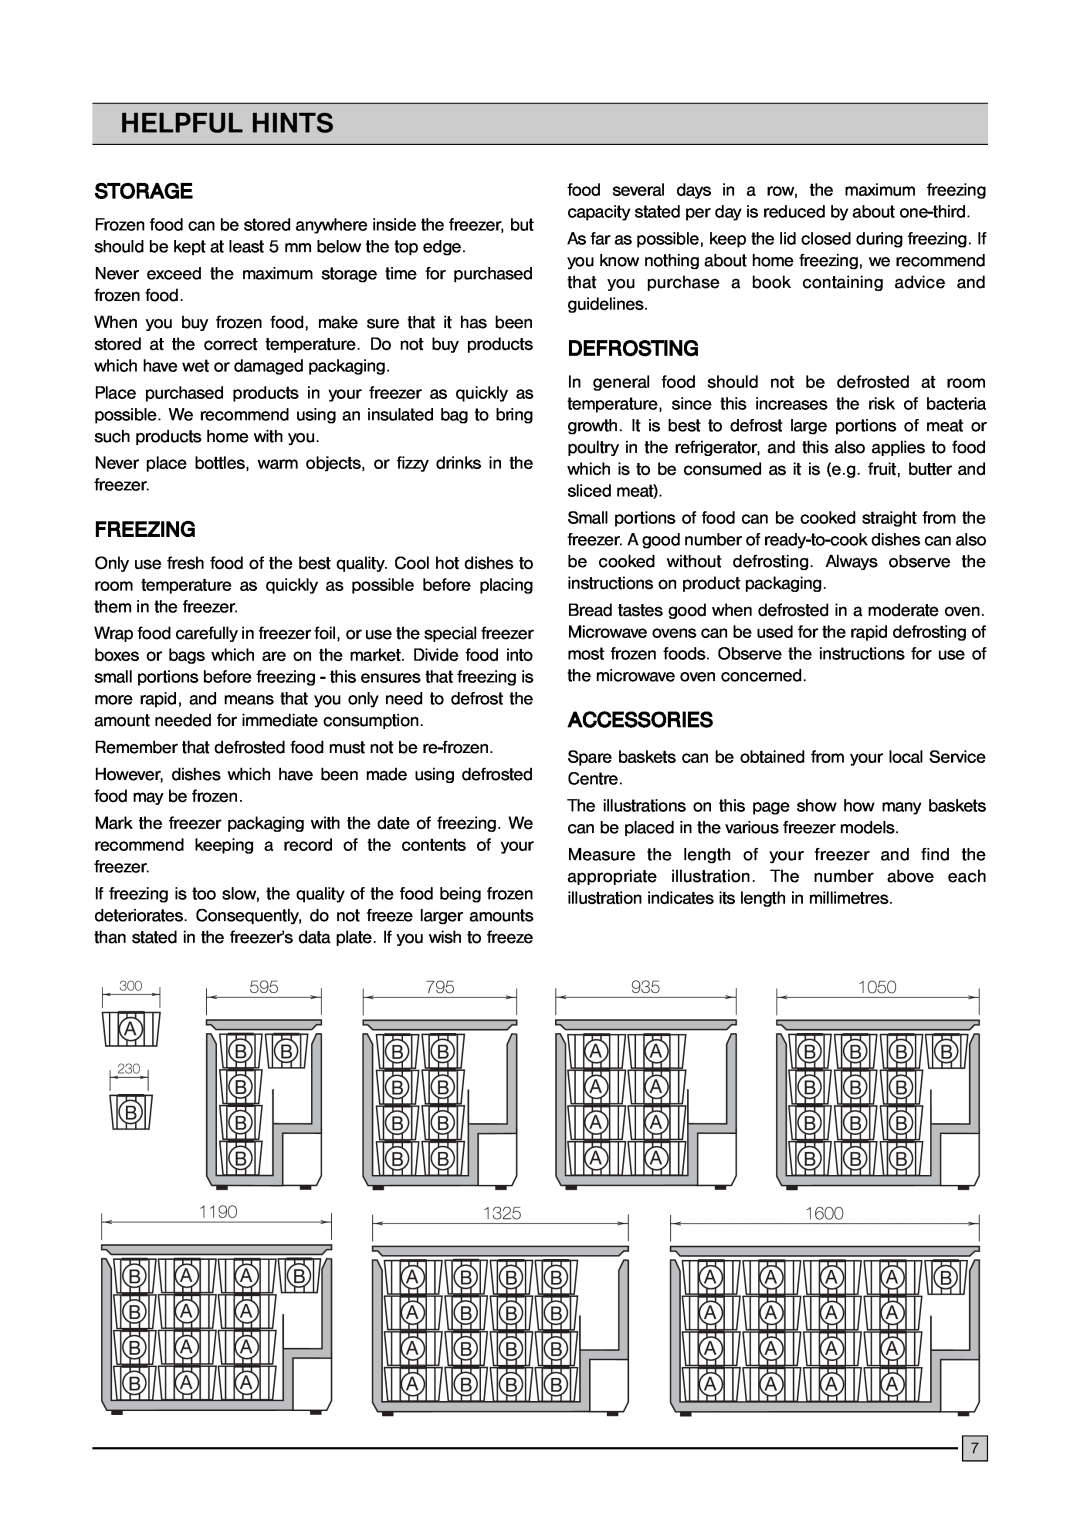 Frigidaire FCFH 183 BW, FCFH 53 BW, FCFH 103 BW installation manual Helpful Hints, Storage, Freezing, Defrosting, Accessories 